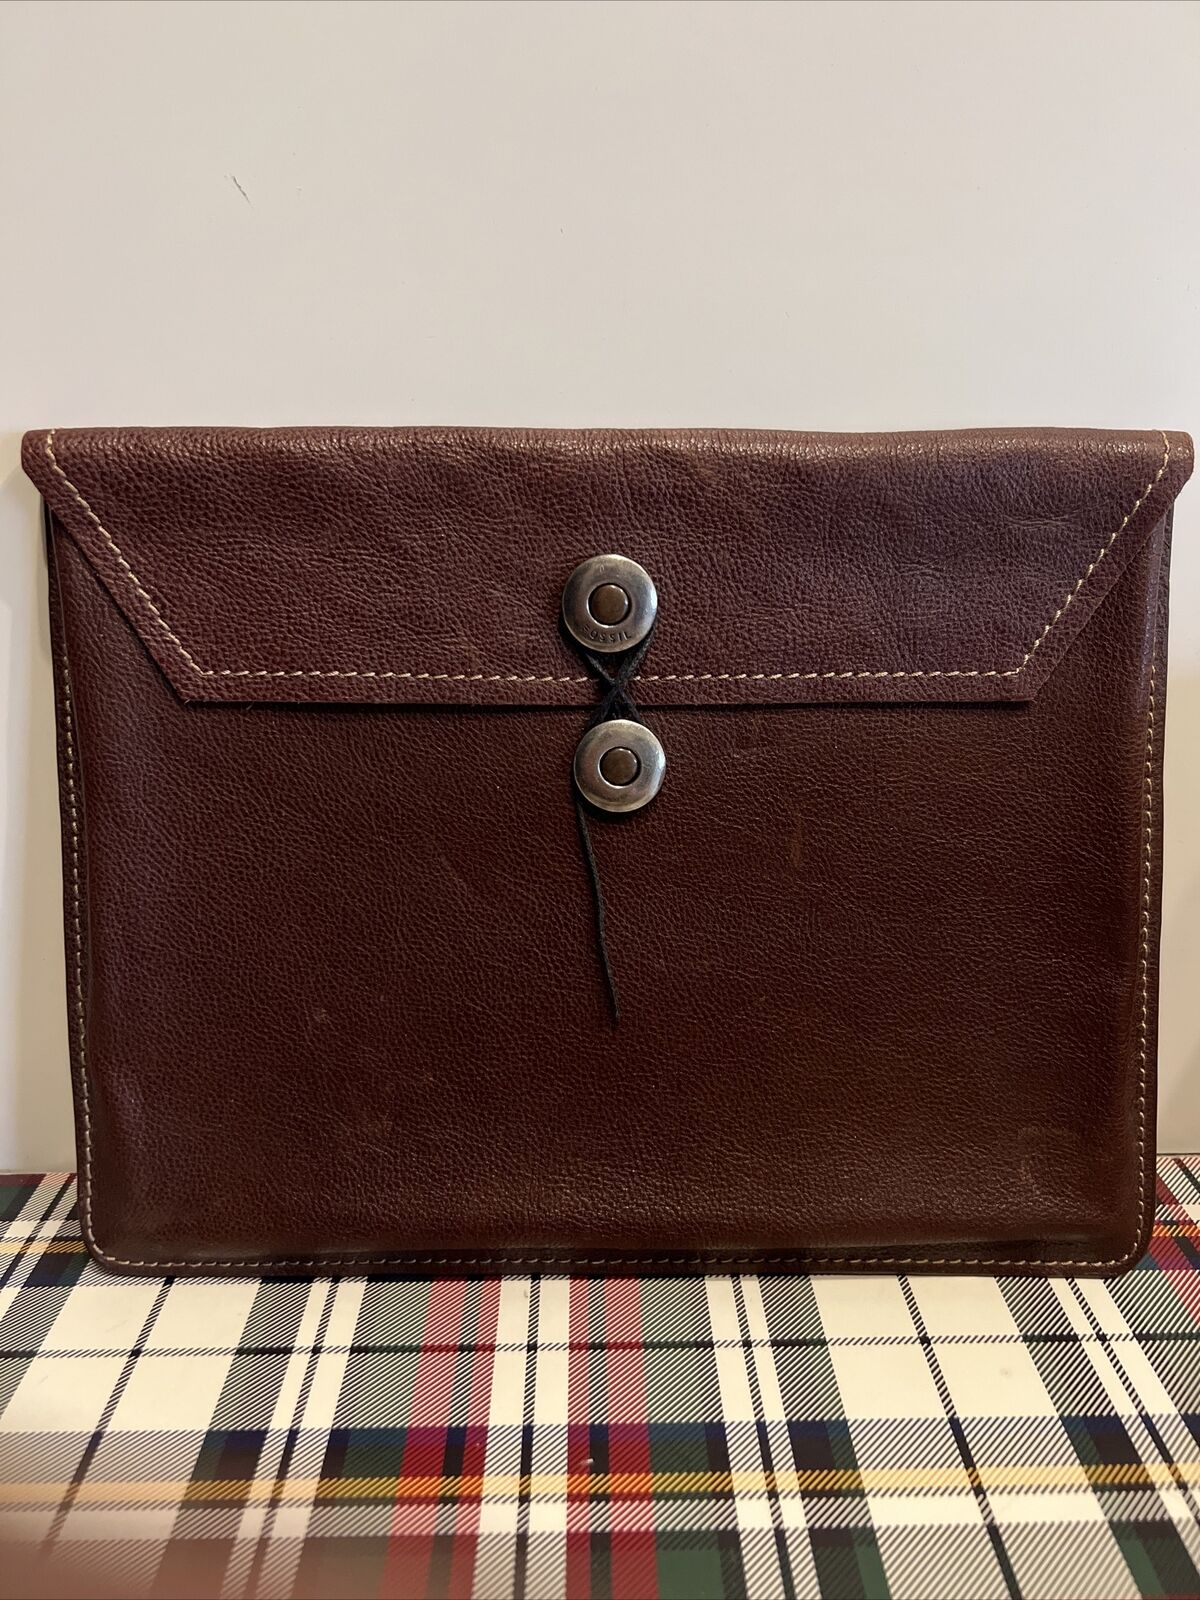 Vintage Fossil Brown Leather Folio / iPad Case - 10 X 8 X 1 Inches